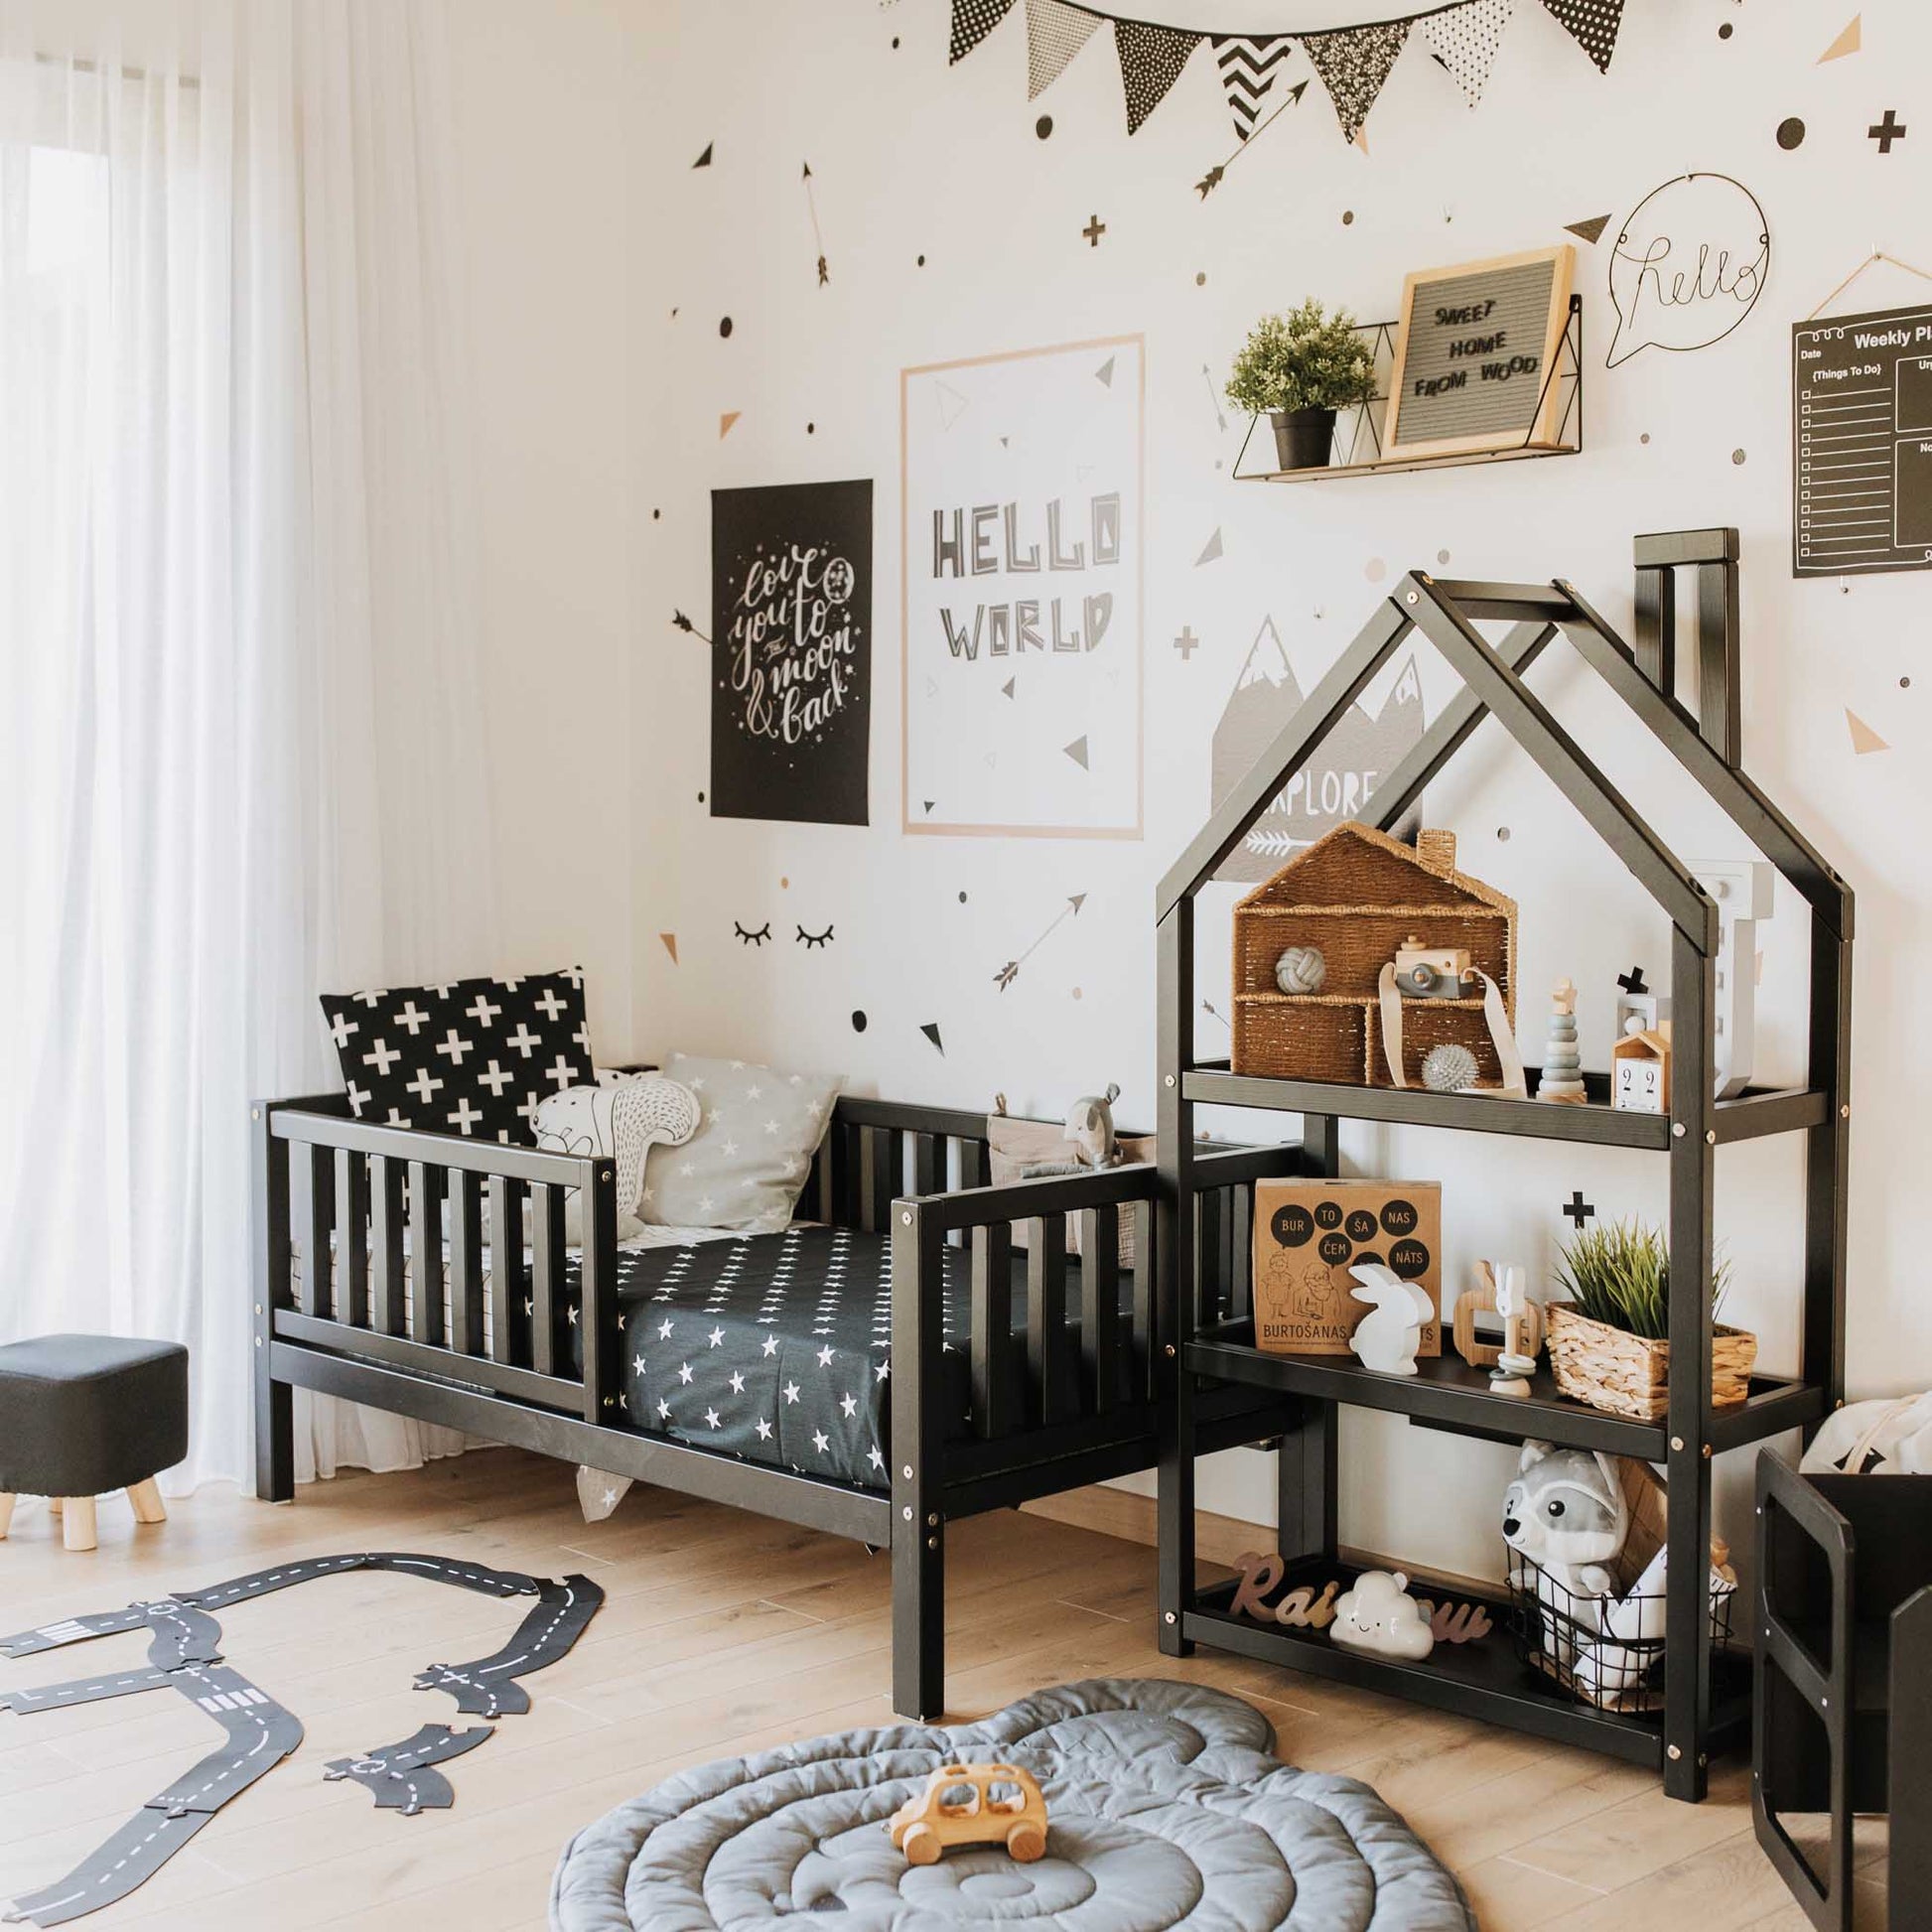 A long-lasting 2-in-1 toddler bed on legs with a vertical rail fence in a boy's room with black and white decor, from the brand Sweet Home From Wood.